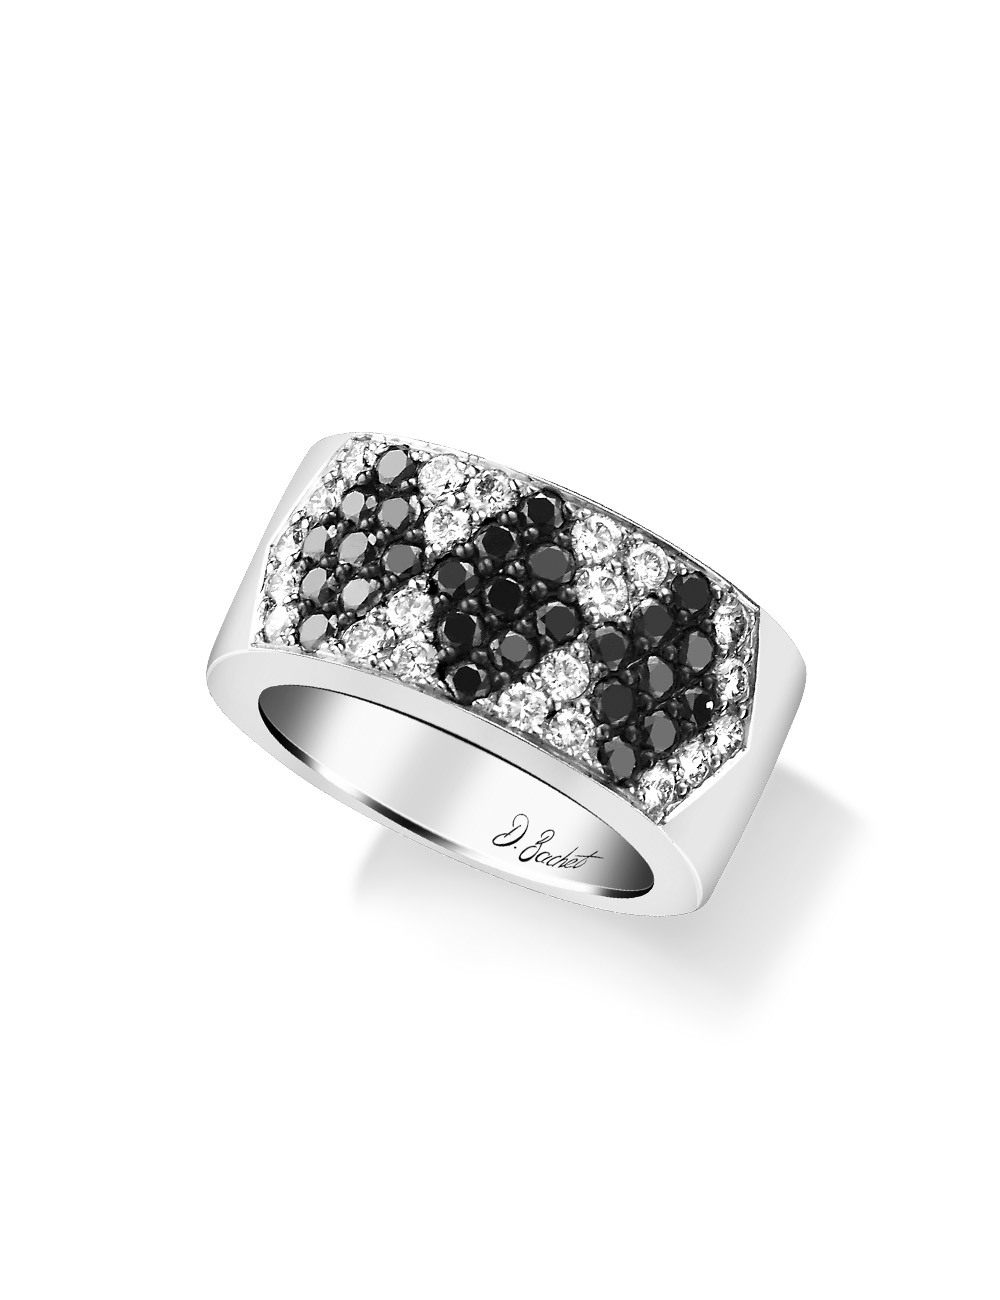 Women's luxury ring in platinum and set with white and black diamonds to wear every day